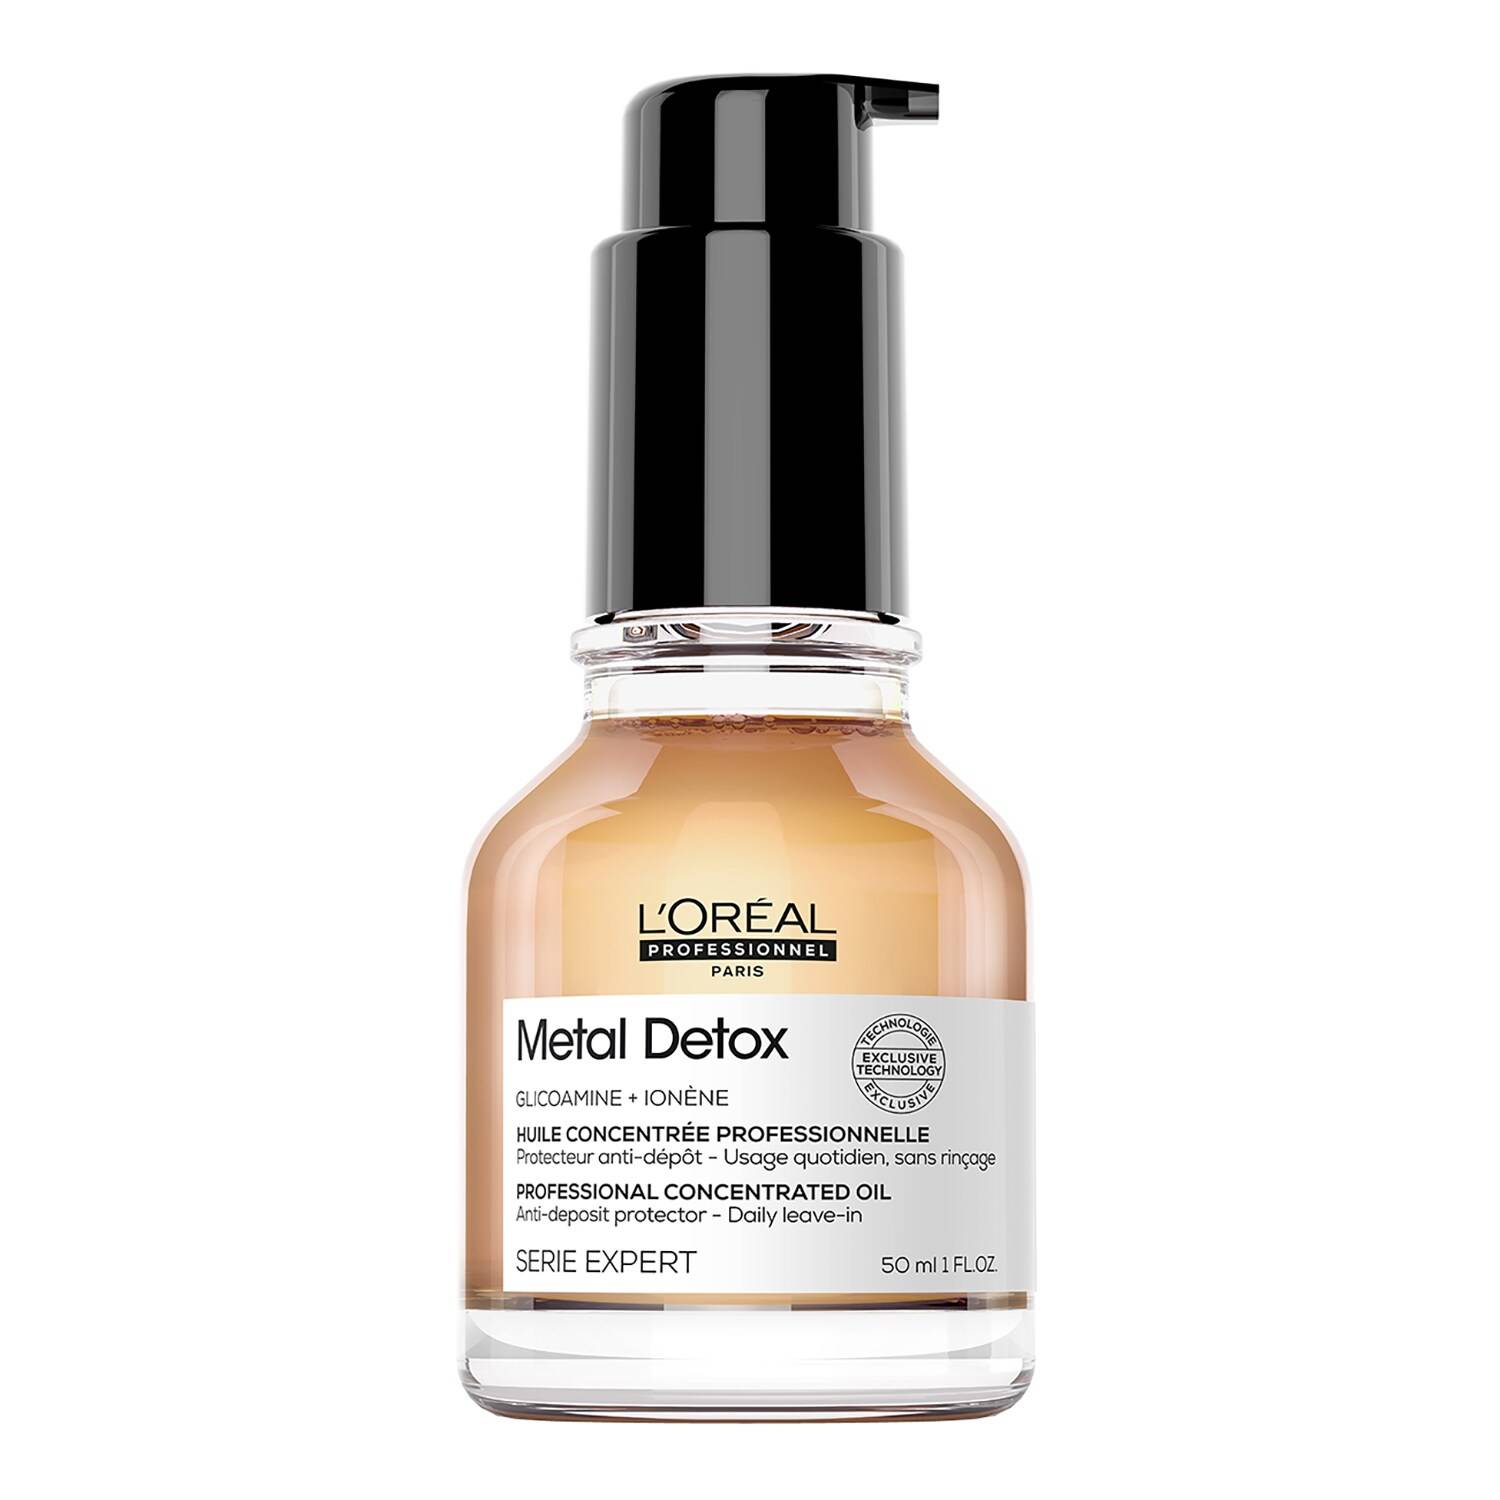 L'Oreal Professionnel Metal Detox Concentrated Oil 50Ml